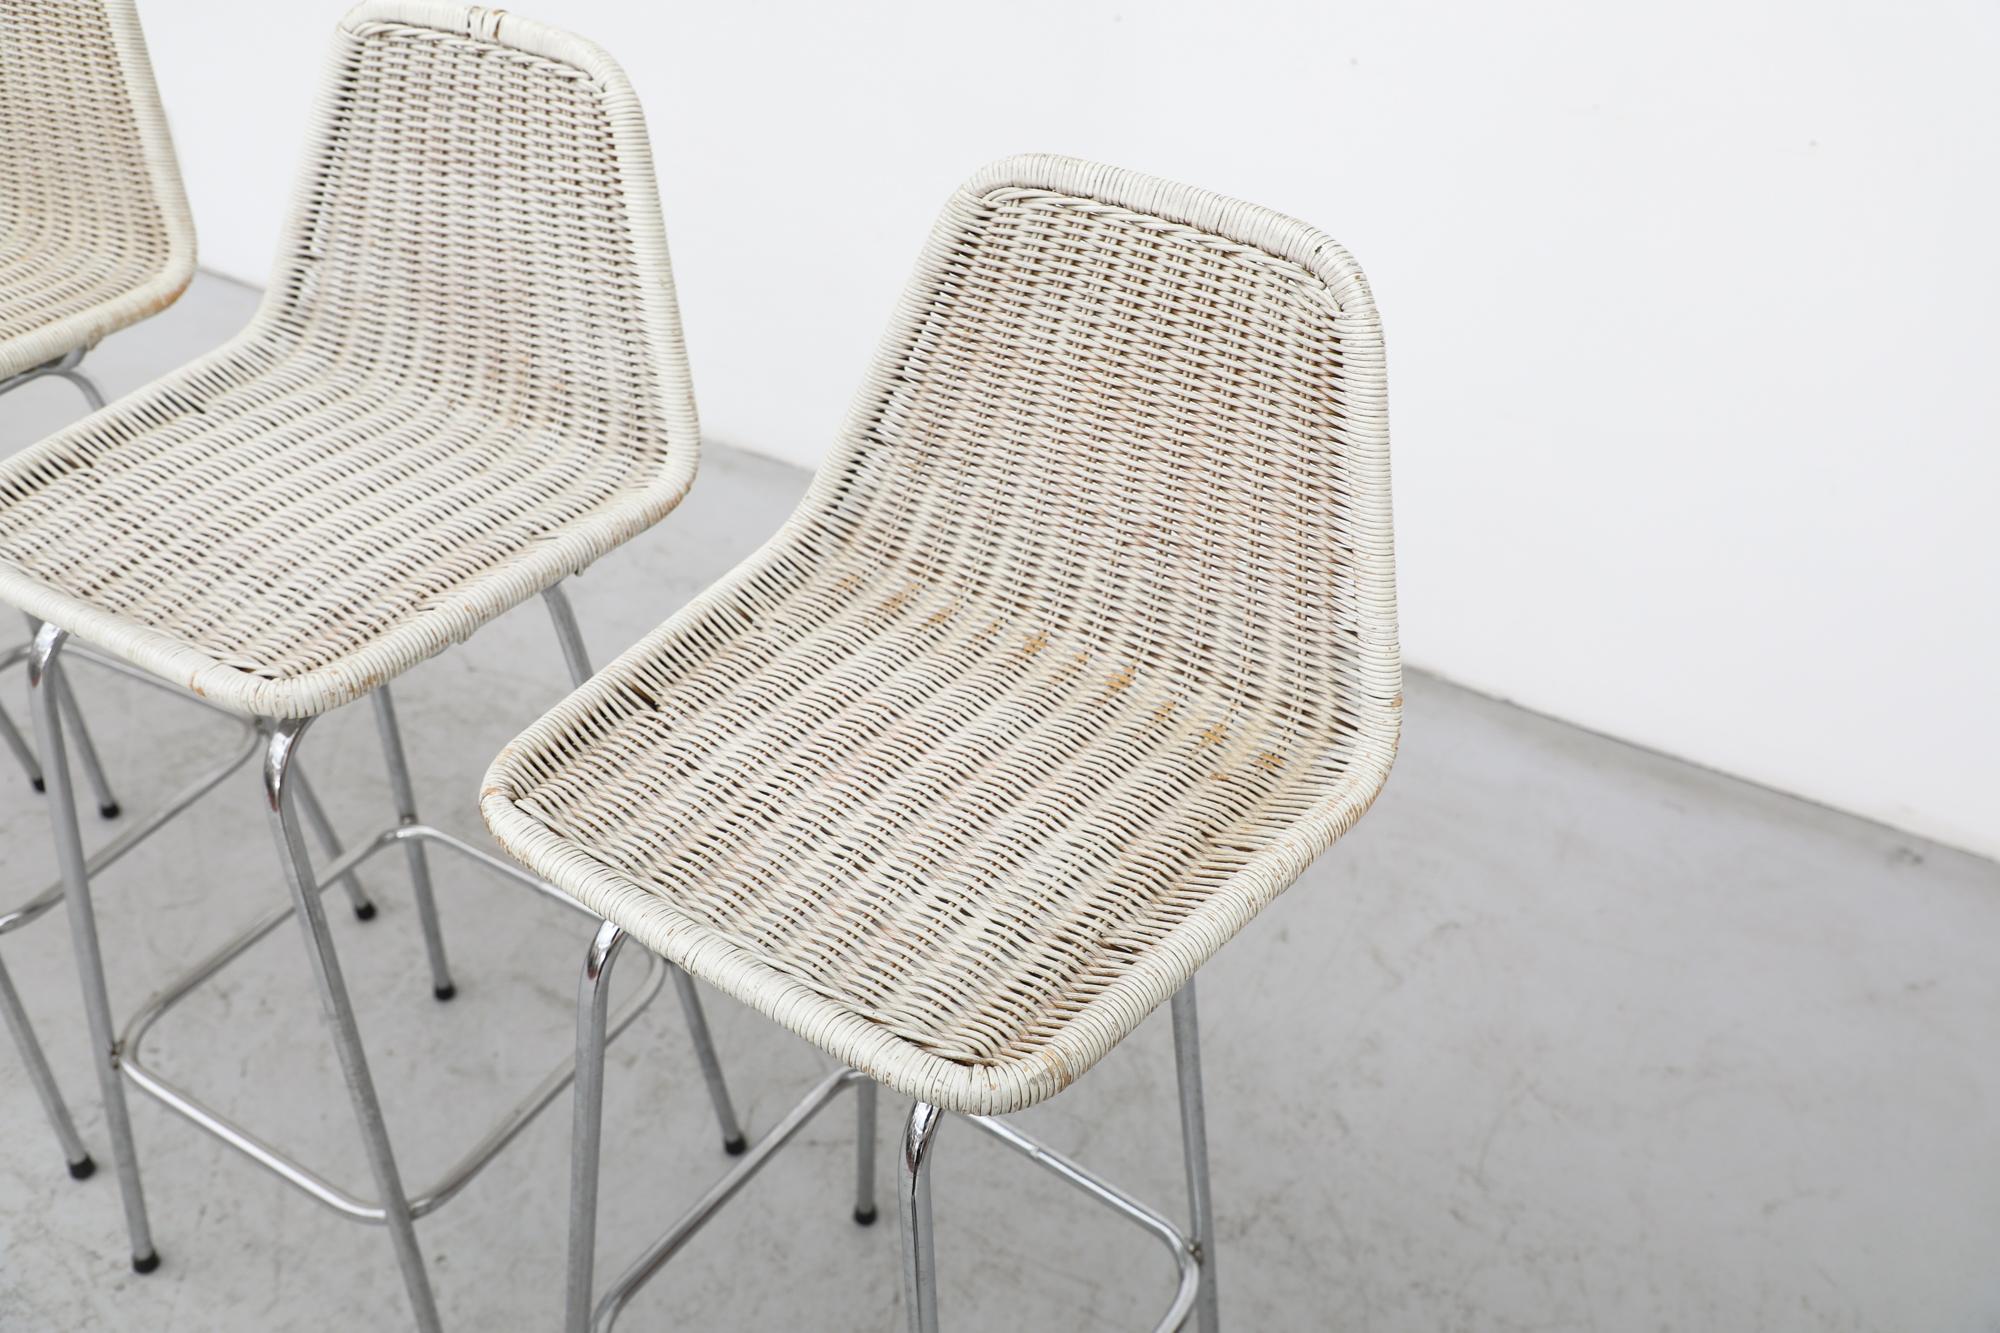 Late 20th Century Set of 4 Charlotte Perriand Style Wicker Bar Height Stools with Chrome Legs For Sale